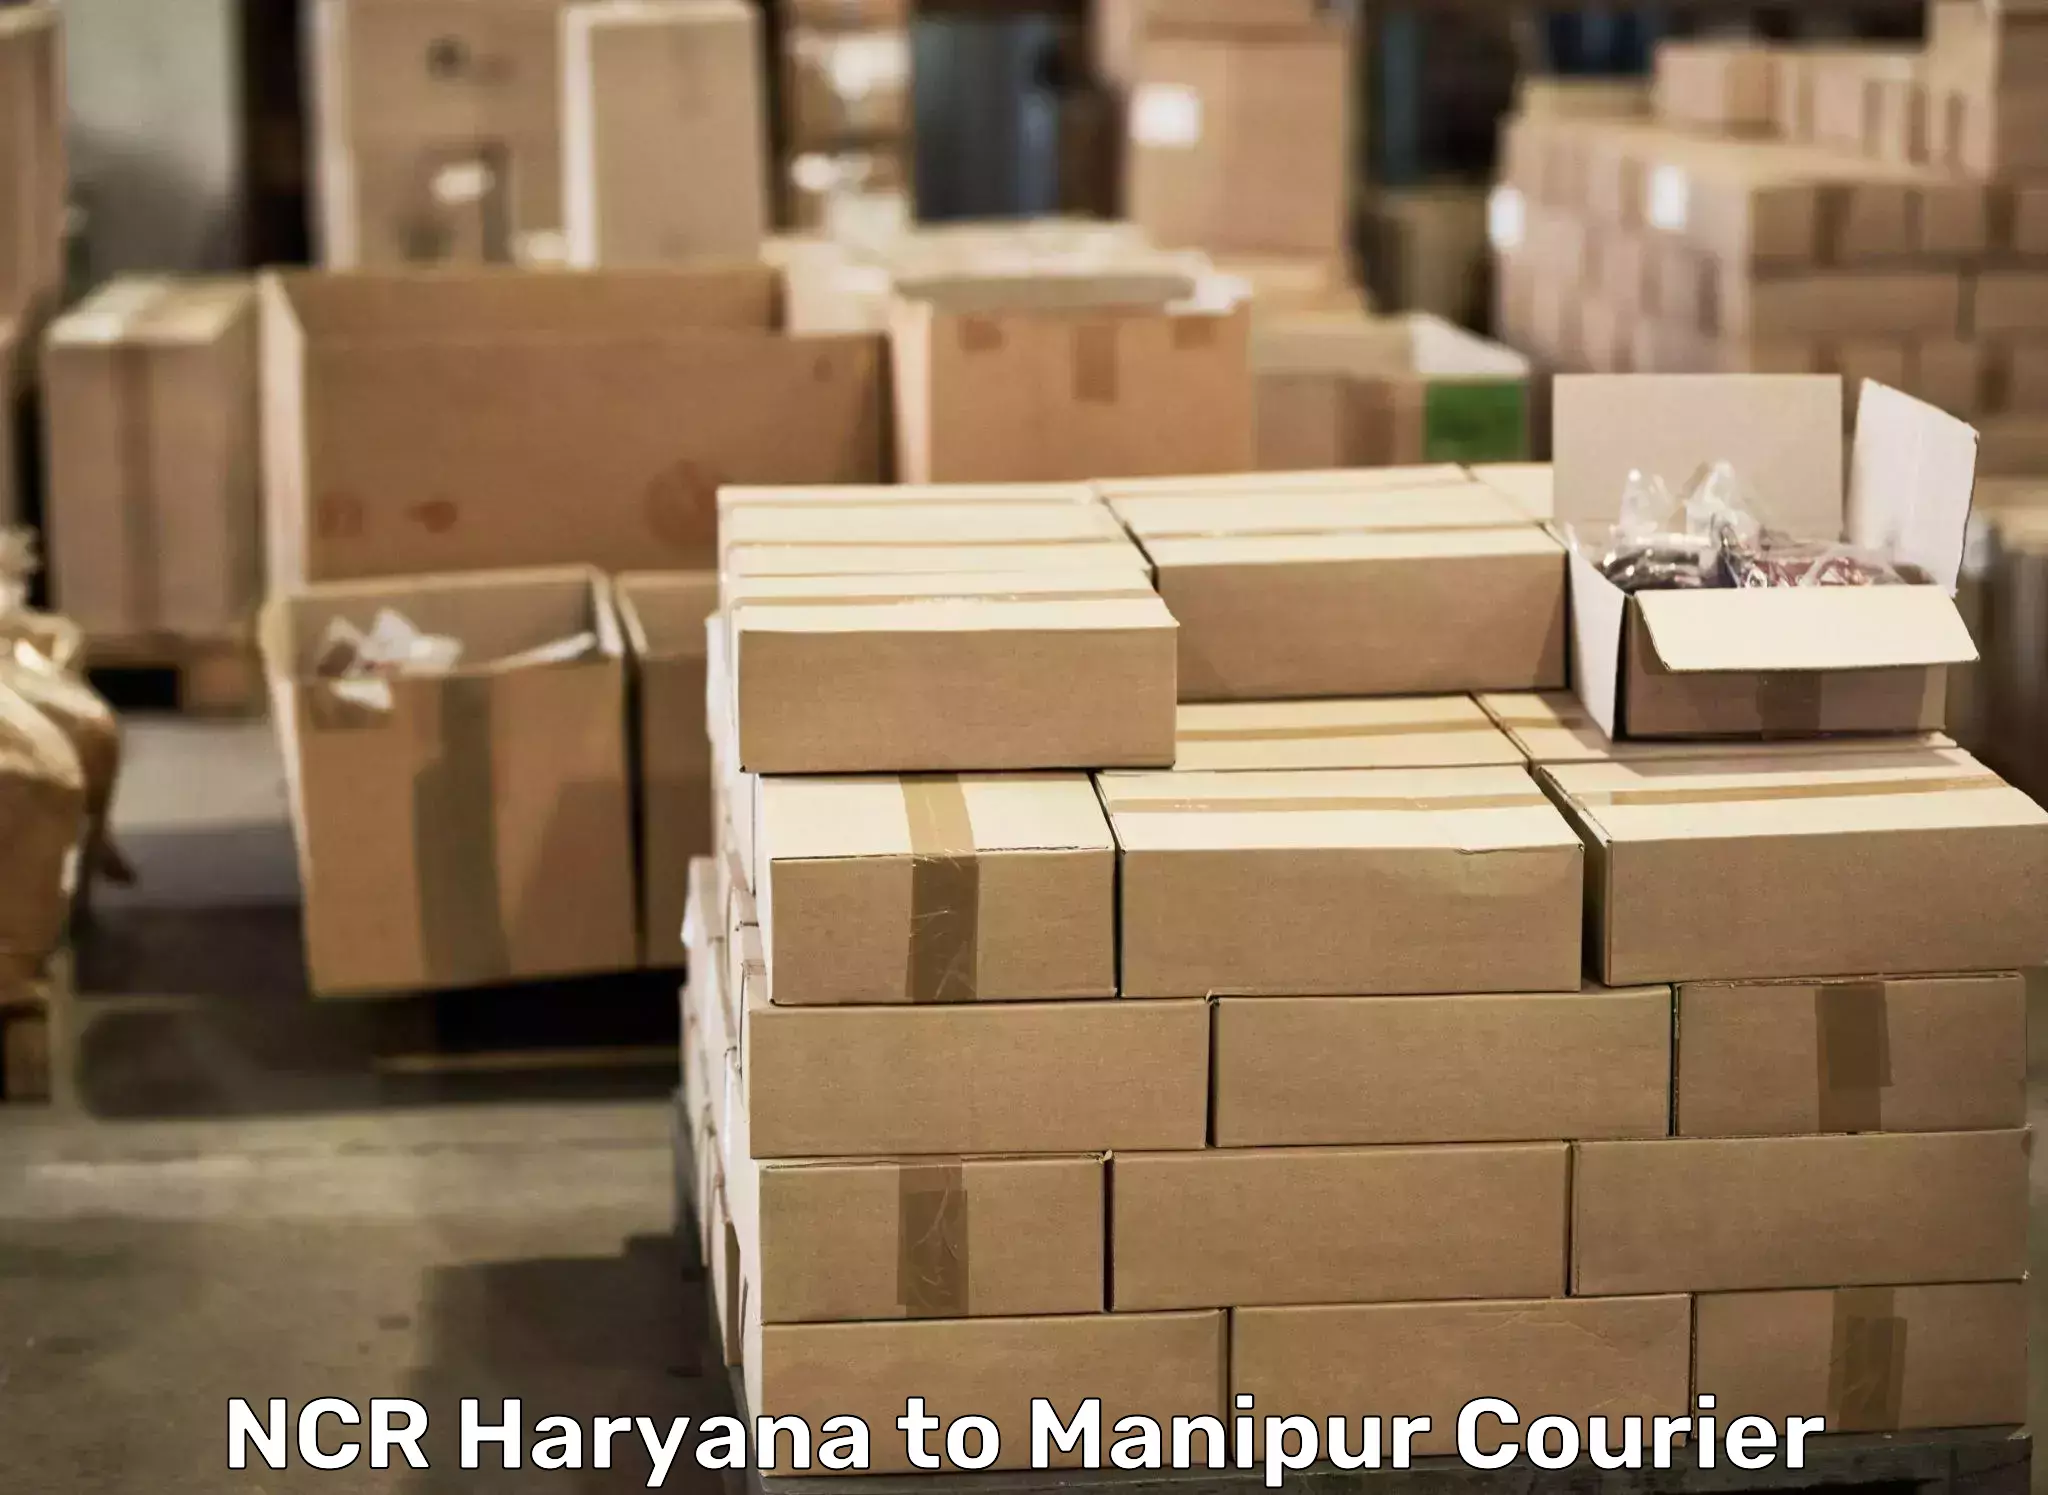 Furniture delivery service NCR Haryana to Tamenglong